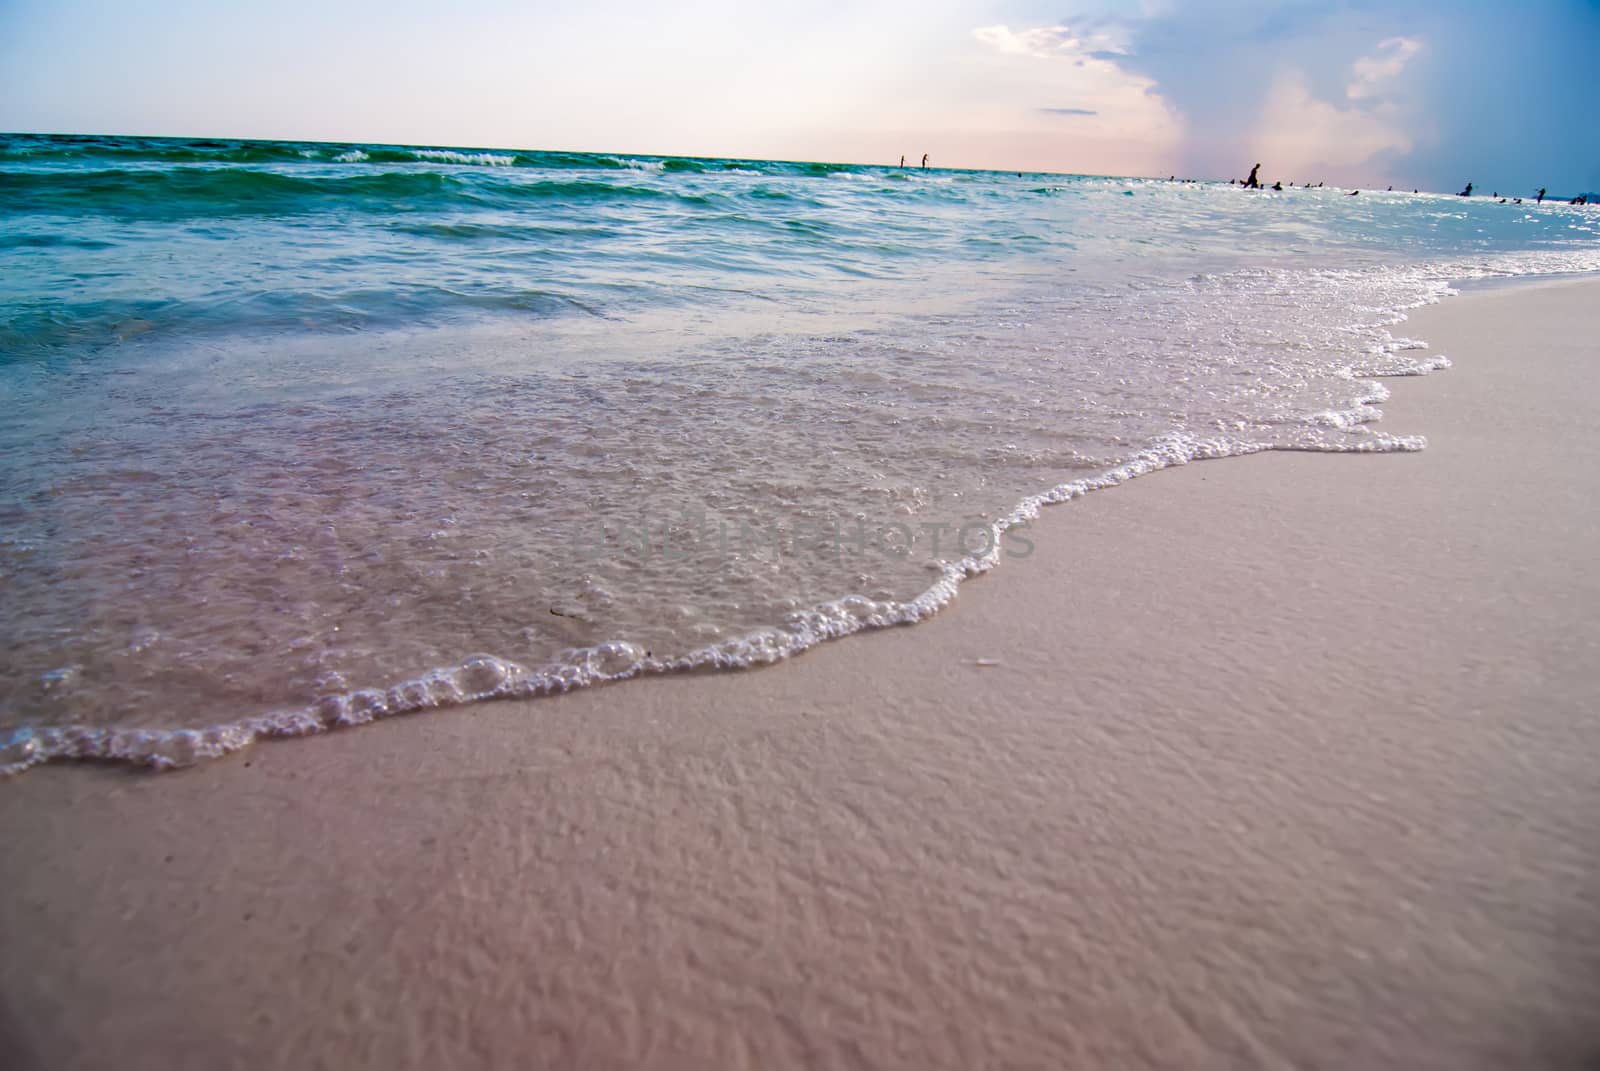 crystal clear water and beach scenes at destin and panama city florida